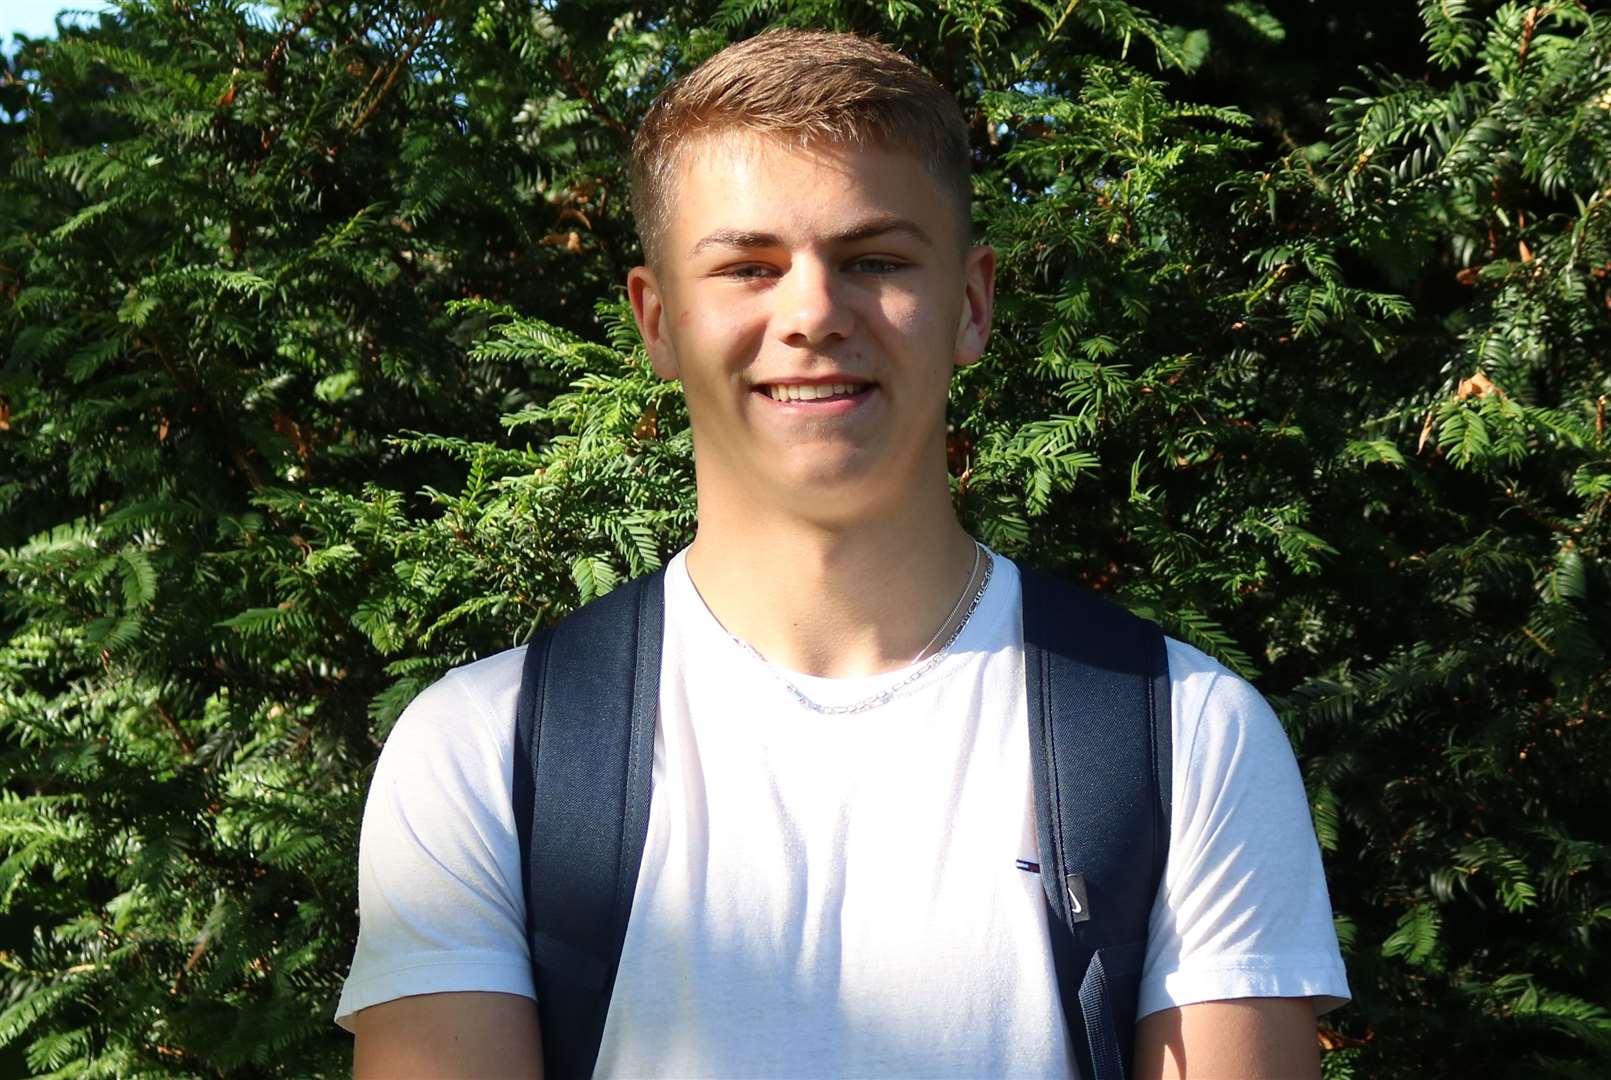 Keen athlete Xavier Smitherman-Cairns who celebrates all grades at 9-7’s (A*-A) at King's School Rochester (15596990)